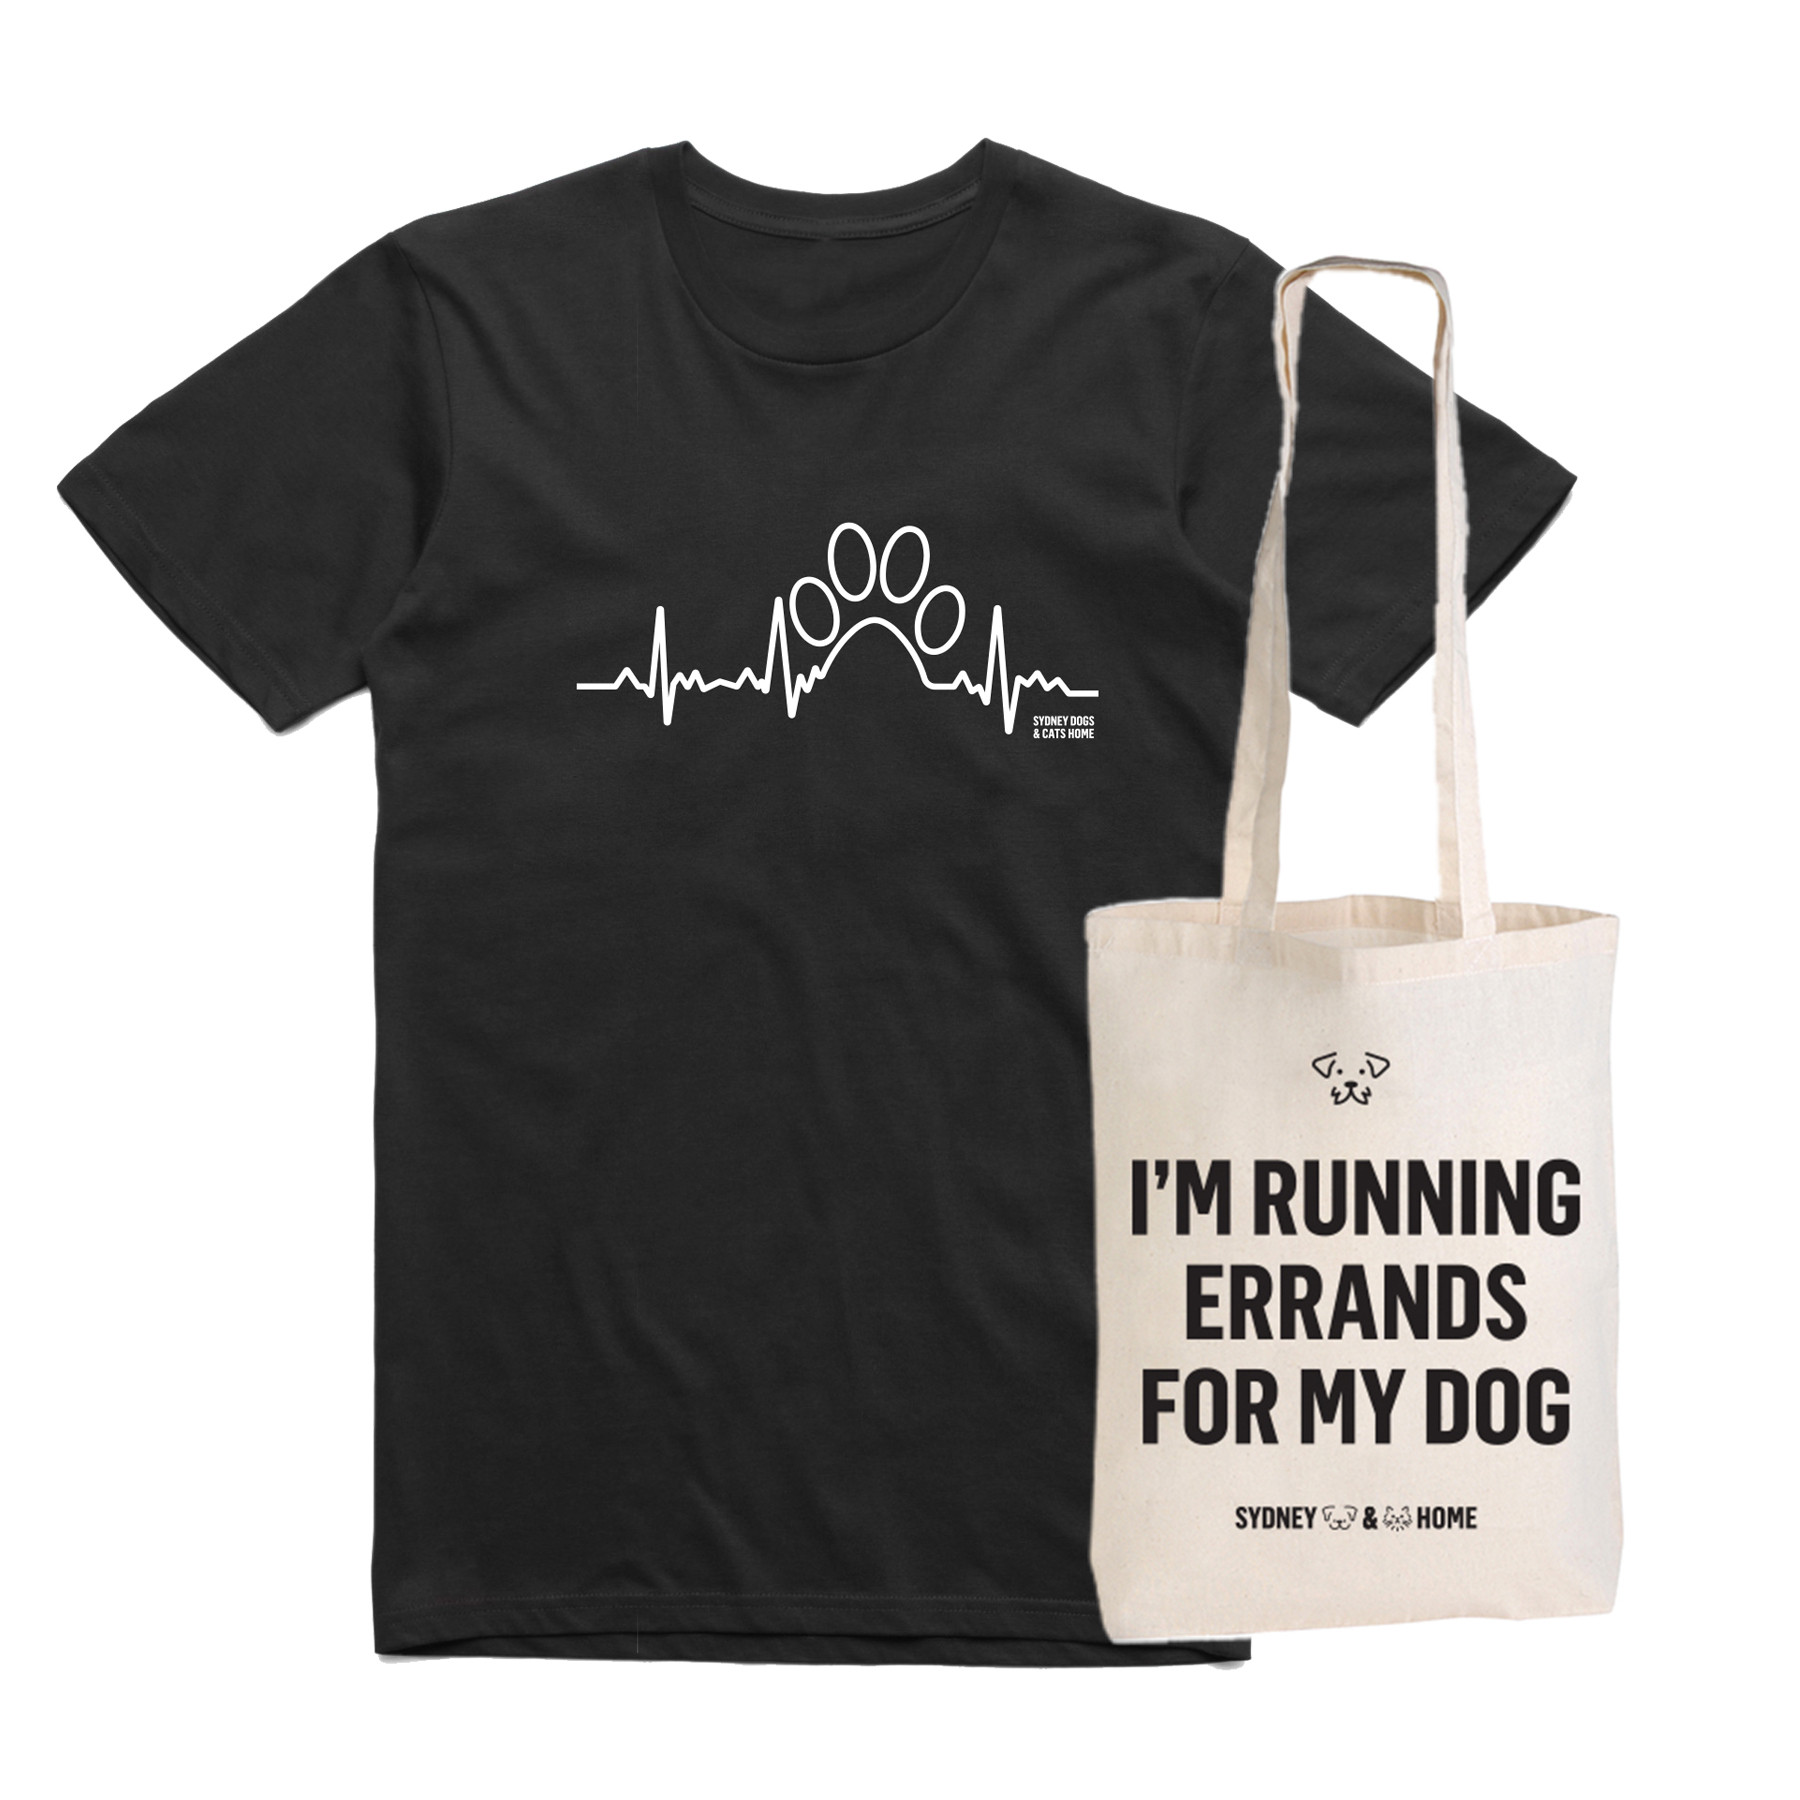 SYDNEY DOGS AND CATS HOME - PAW PULSE MENS TEE + ERRANDS FOR MY DOG TOTE BUNDLE